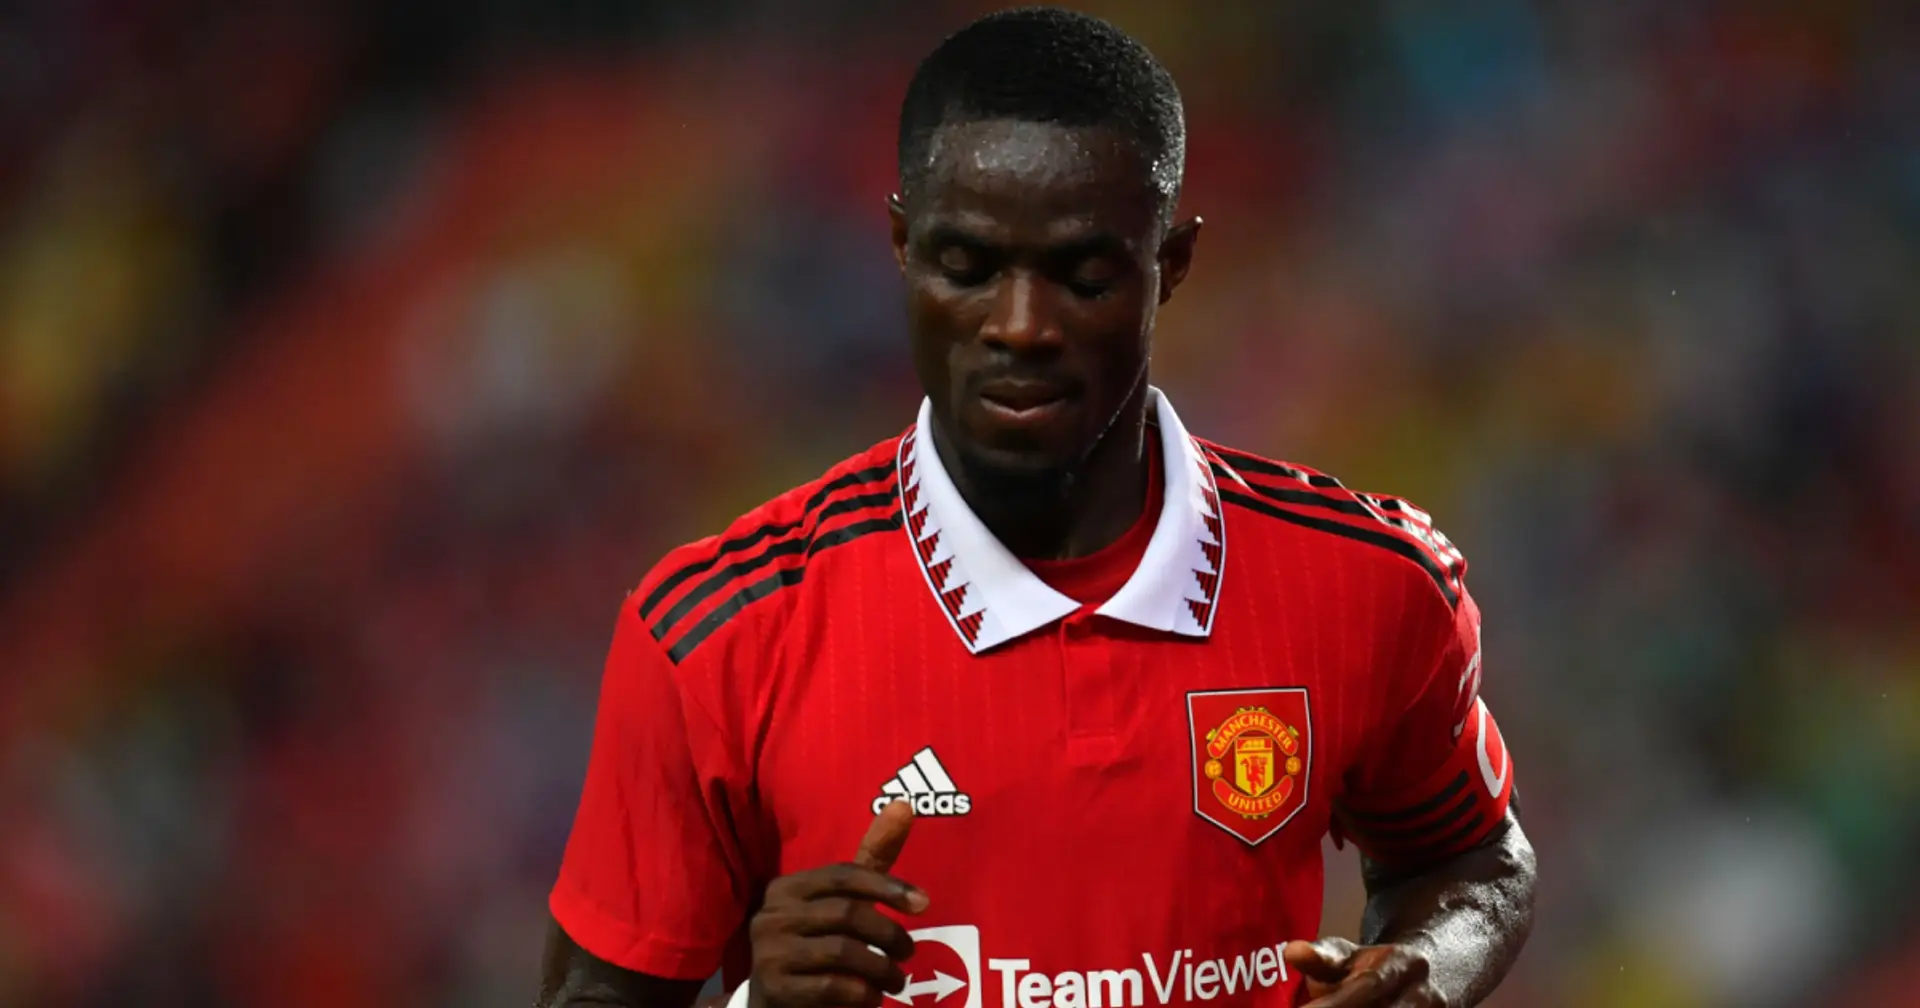 Daily Mail: Man United ready to sell Eric Bailly and 2 more defenders after Martinez signing (reliability: 4 stars)